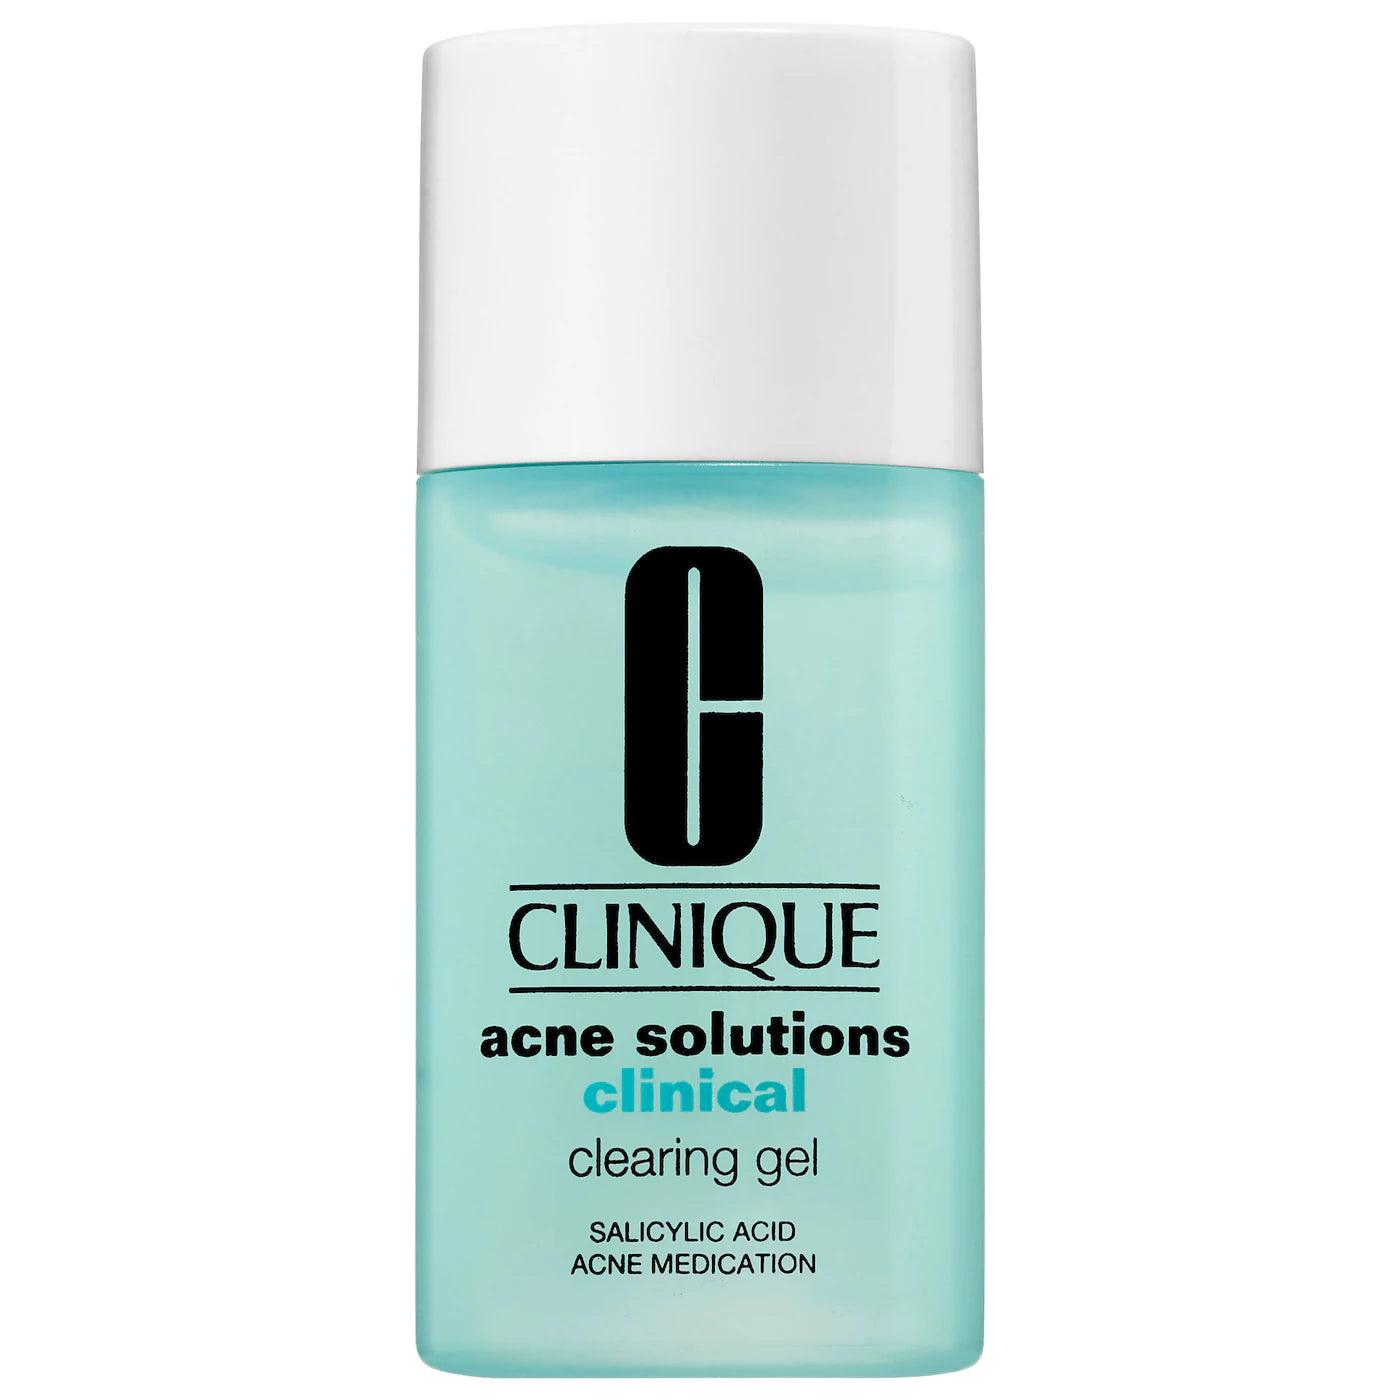 CLINIQUE Acne Solutions Clinical Clearing Gel - Perfume Oasis